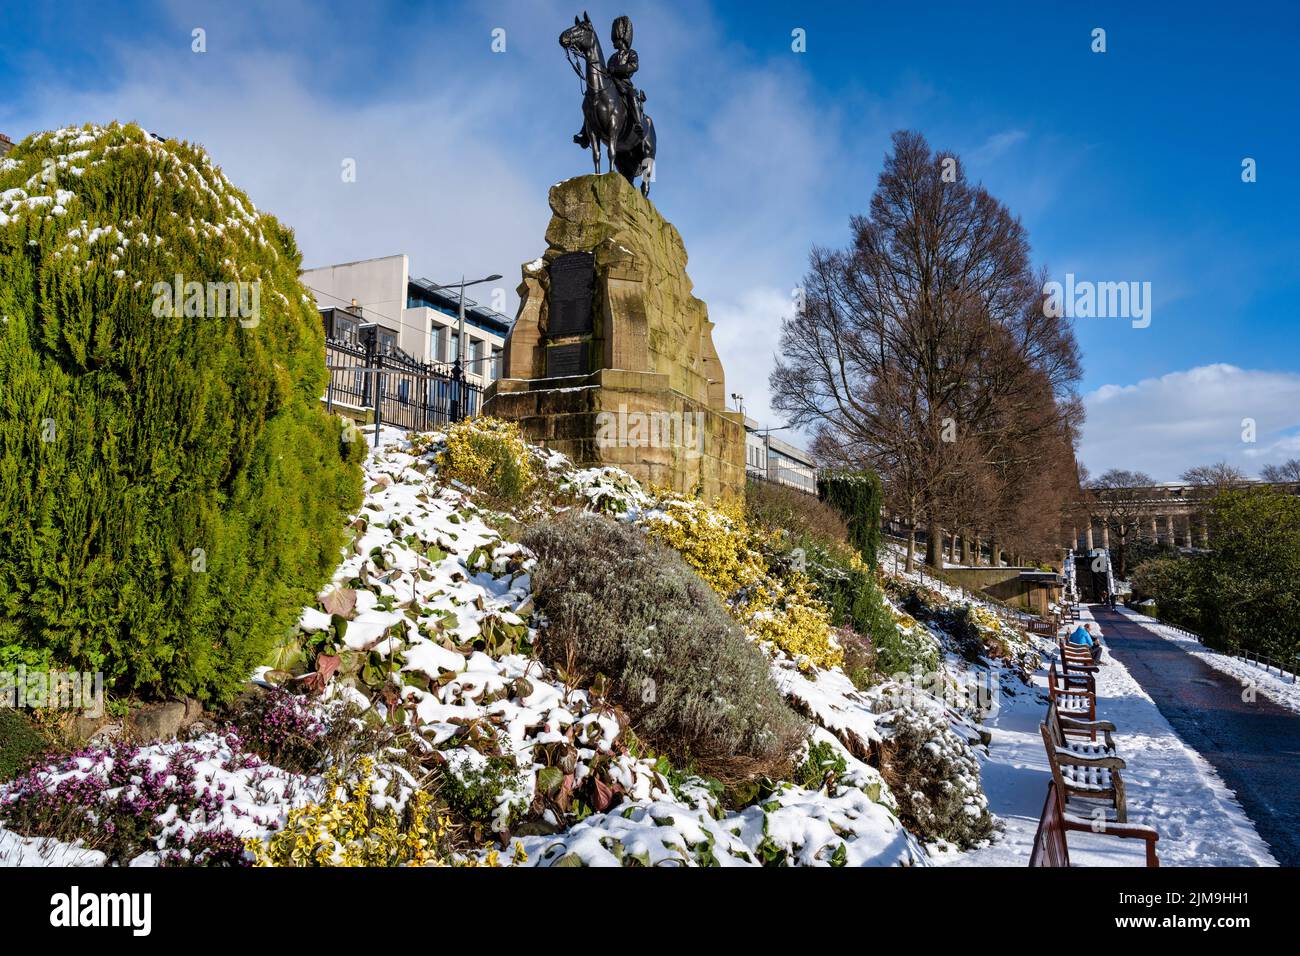 The Royal Scots Greys Monument with a sprinkling of snow in West Princes Street Gardens in Edinburgh, Scotland, UK Stock Photo